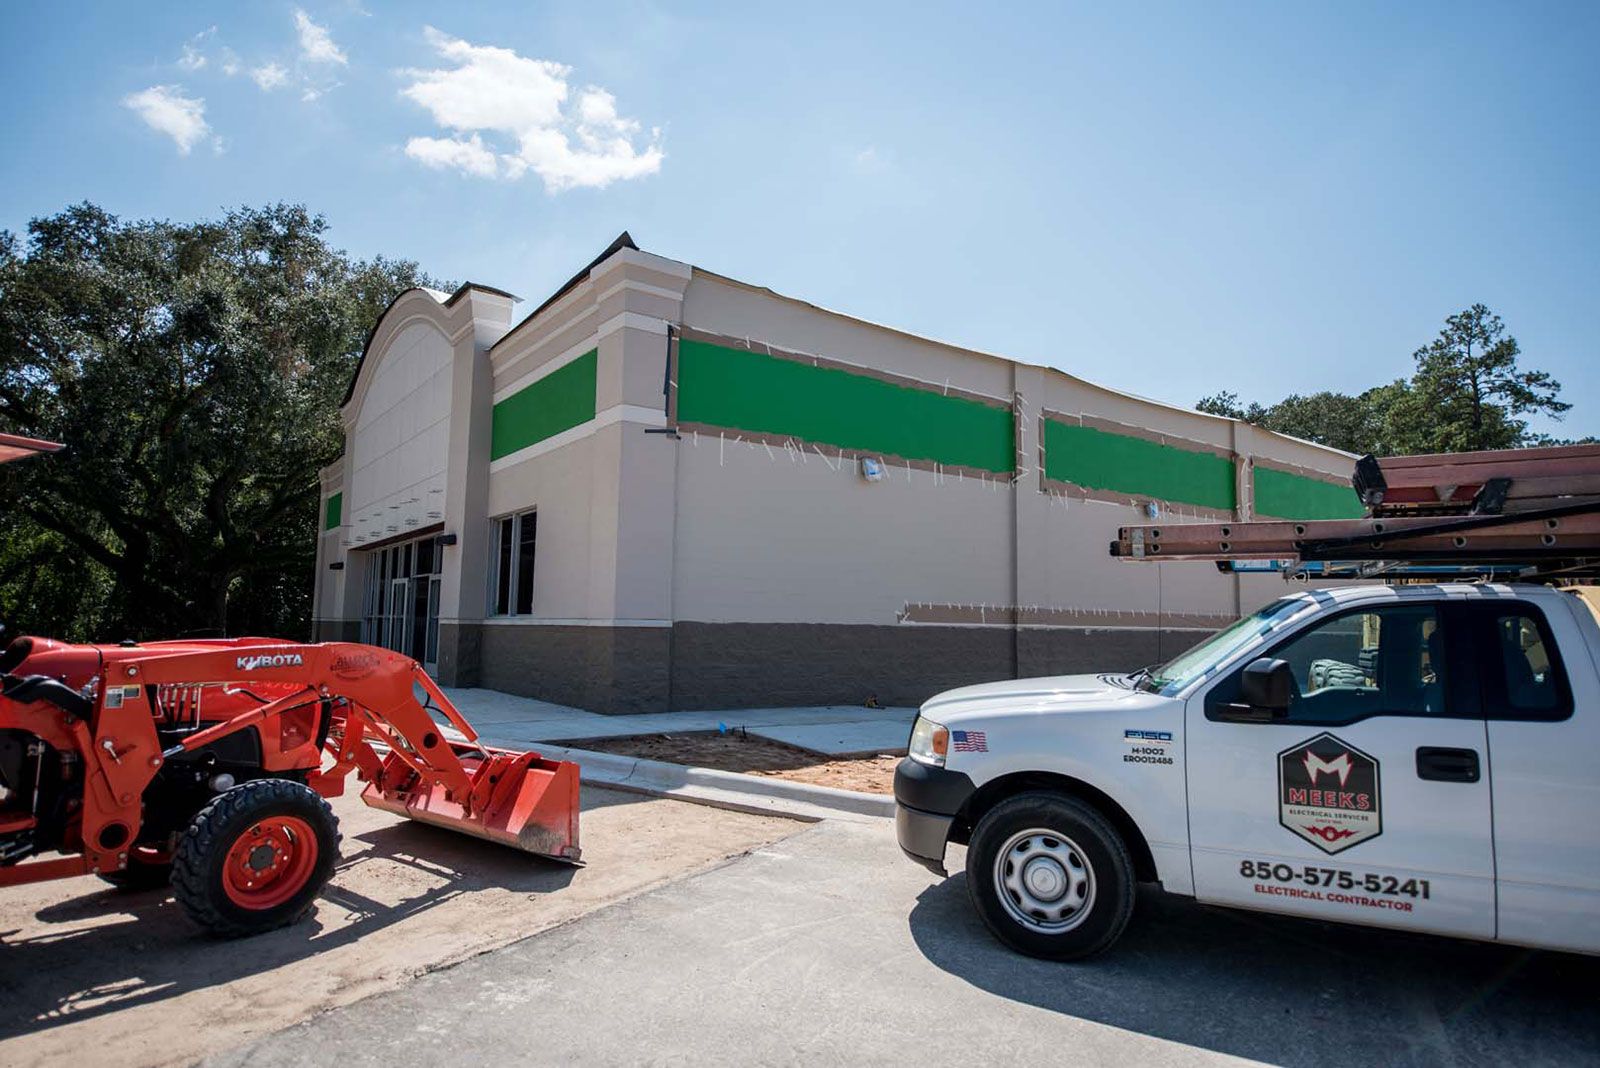 Commercial Electric Company in Tallahassee, FL